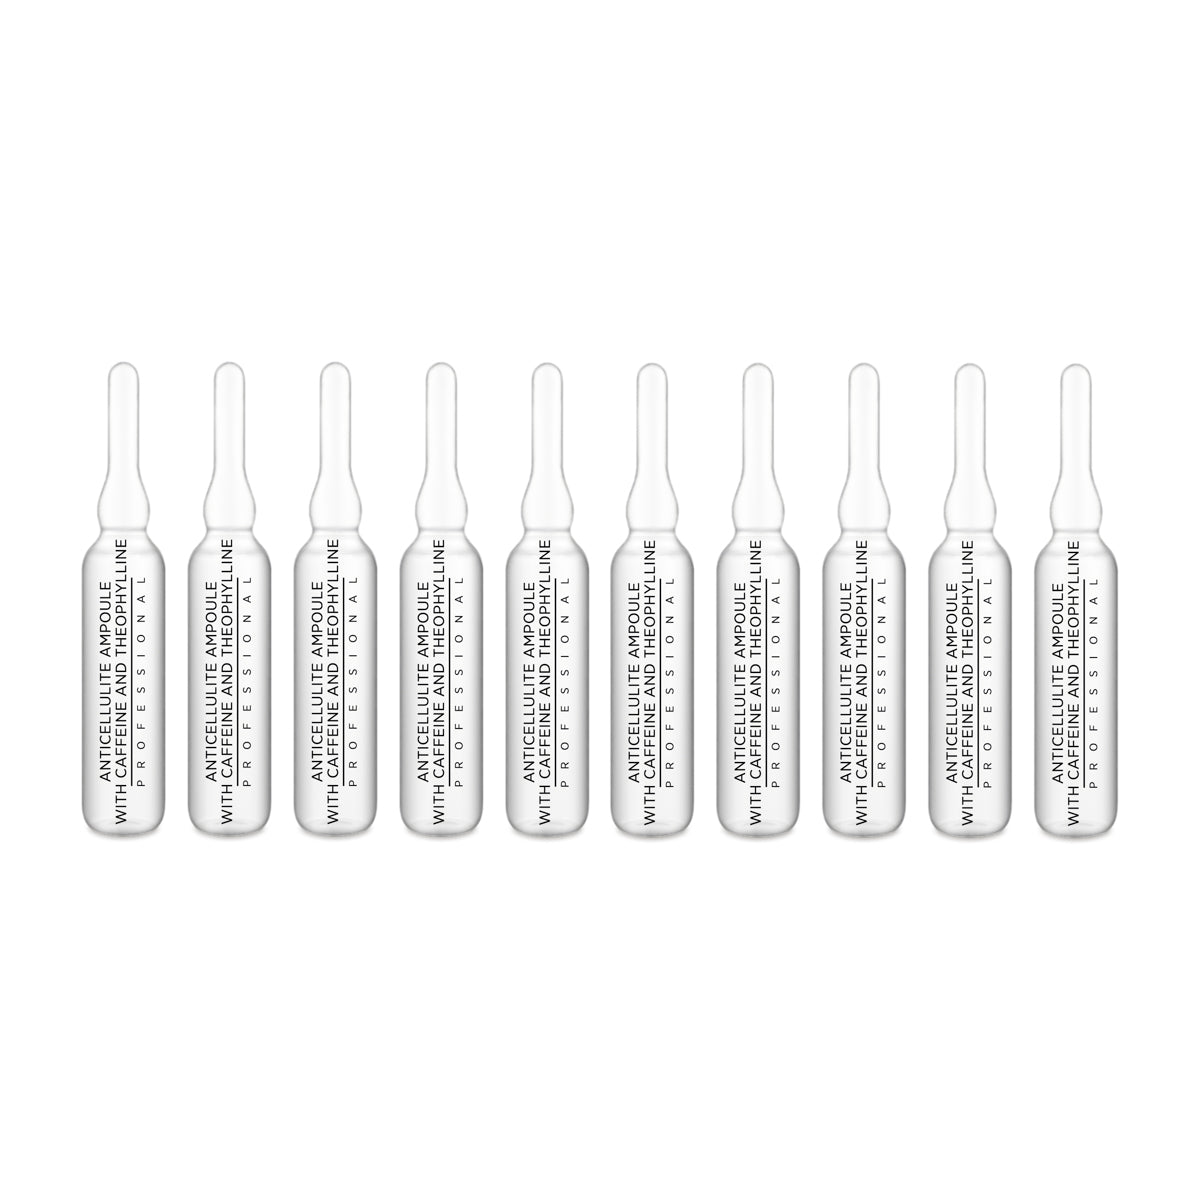 Syis anti-cellulite ampoules with caffeine and theophylline 10x10ml